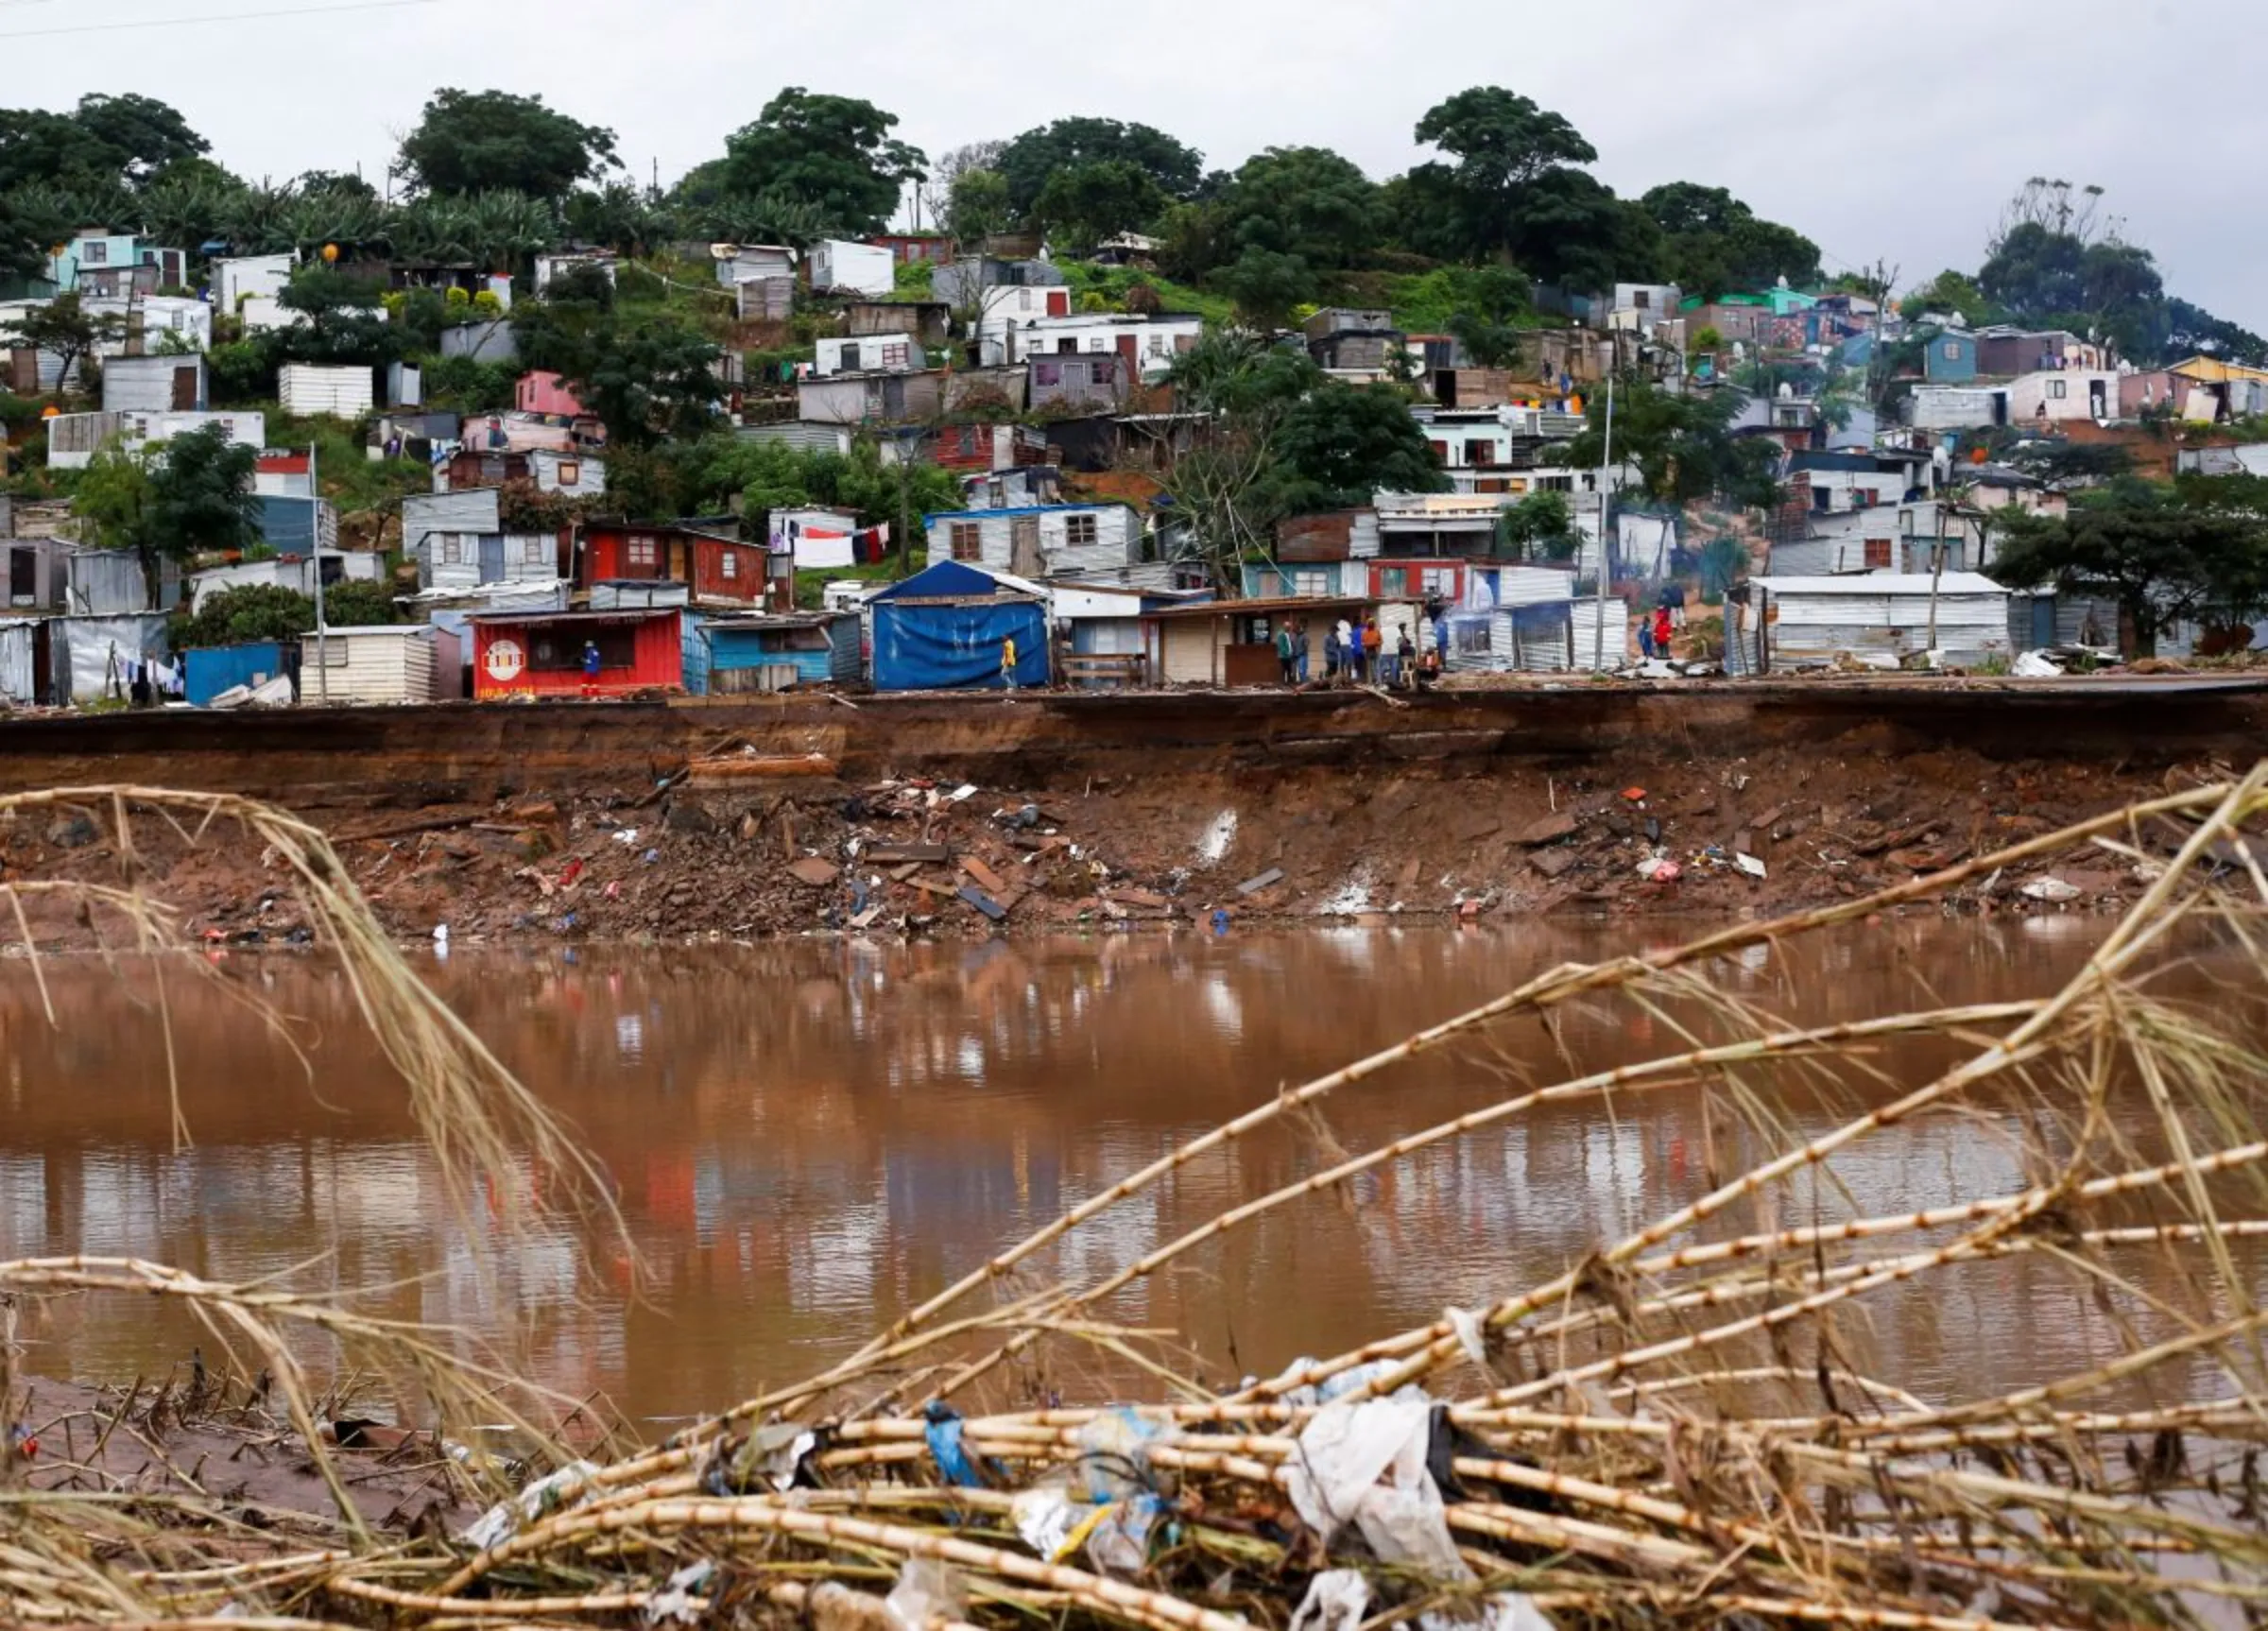 A view shows the destruction caused by flooding in Umlazi near Durban, South Africa, April 16, 2022. REUTERS/Rogan Ward